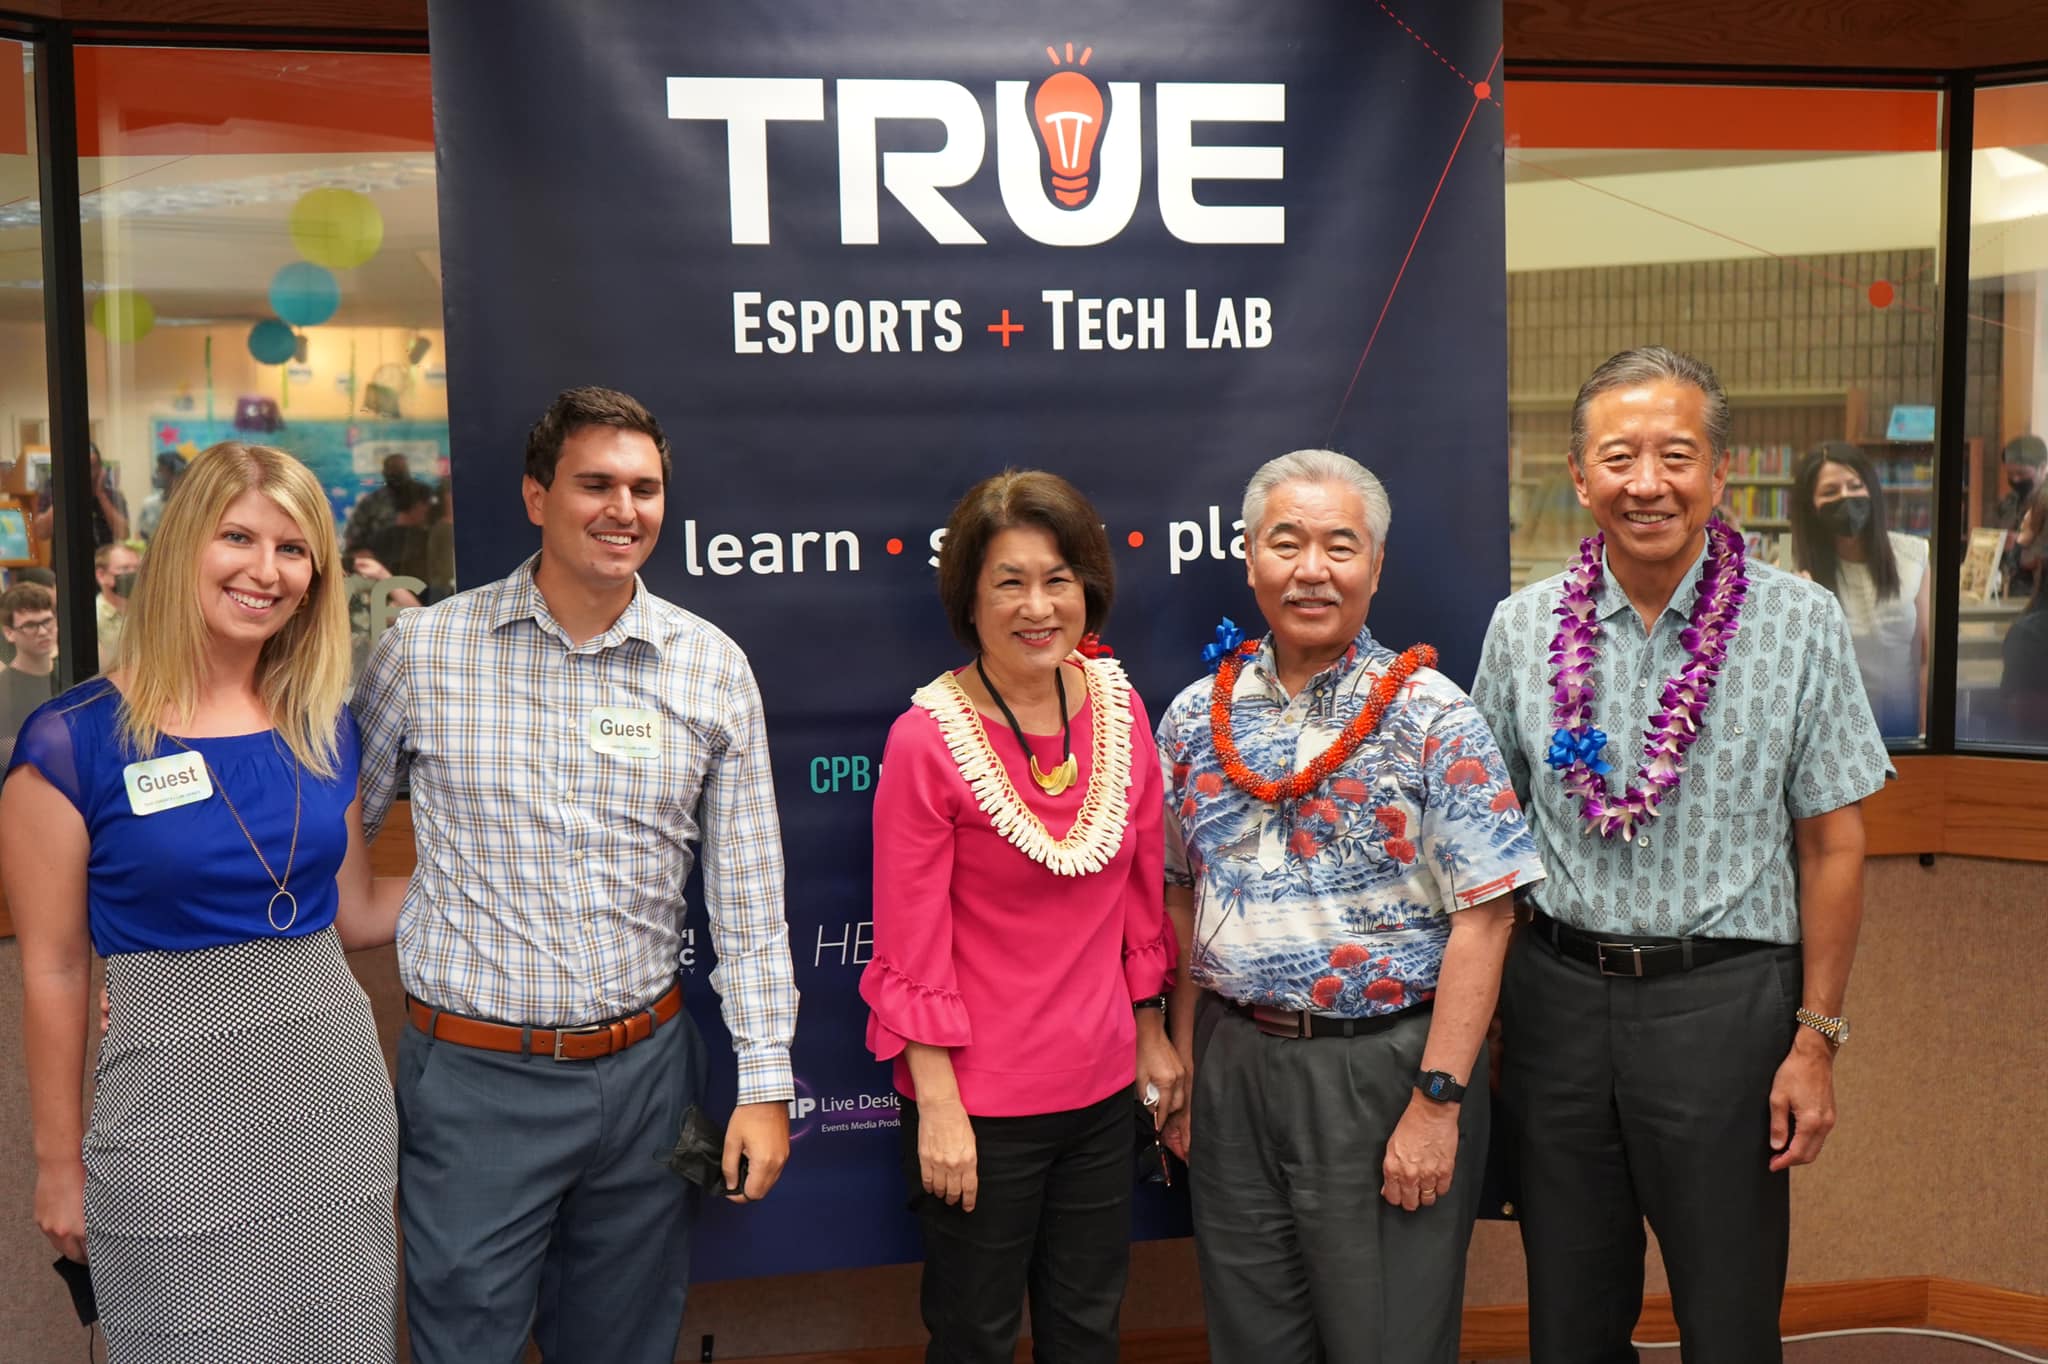 TRUE esports lab collaboration with GameDevHQ - CEO of Central Pacific Bank and Governor of Hawaii